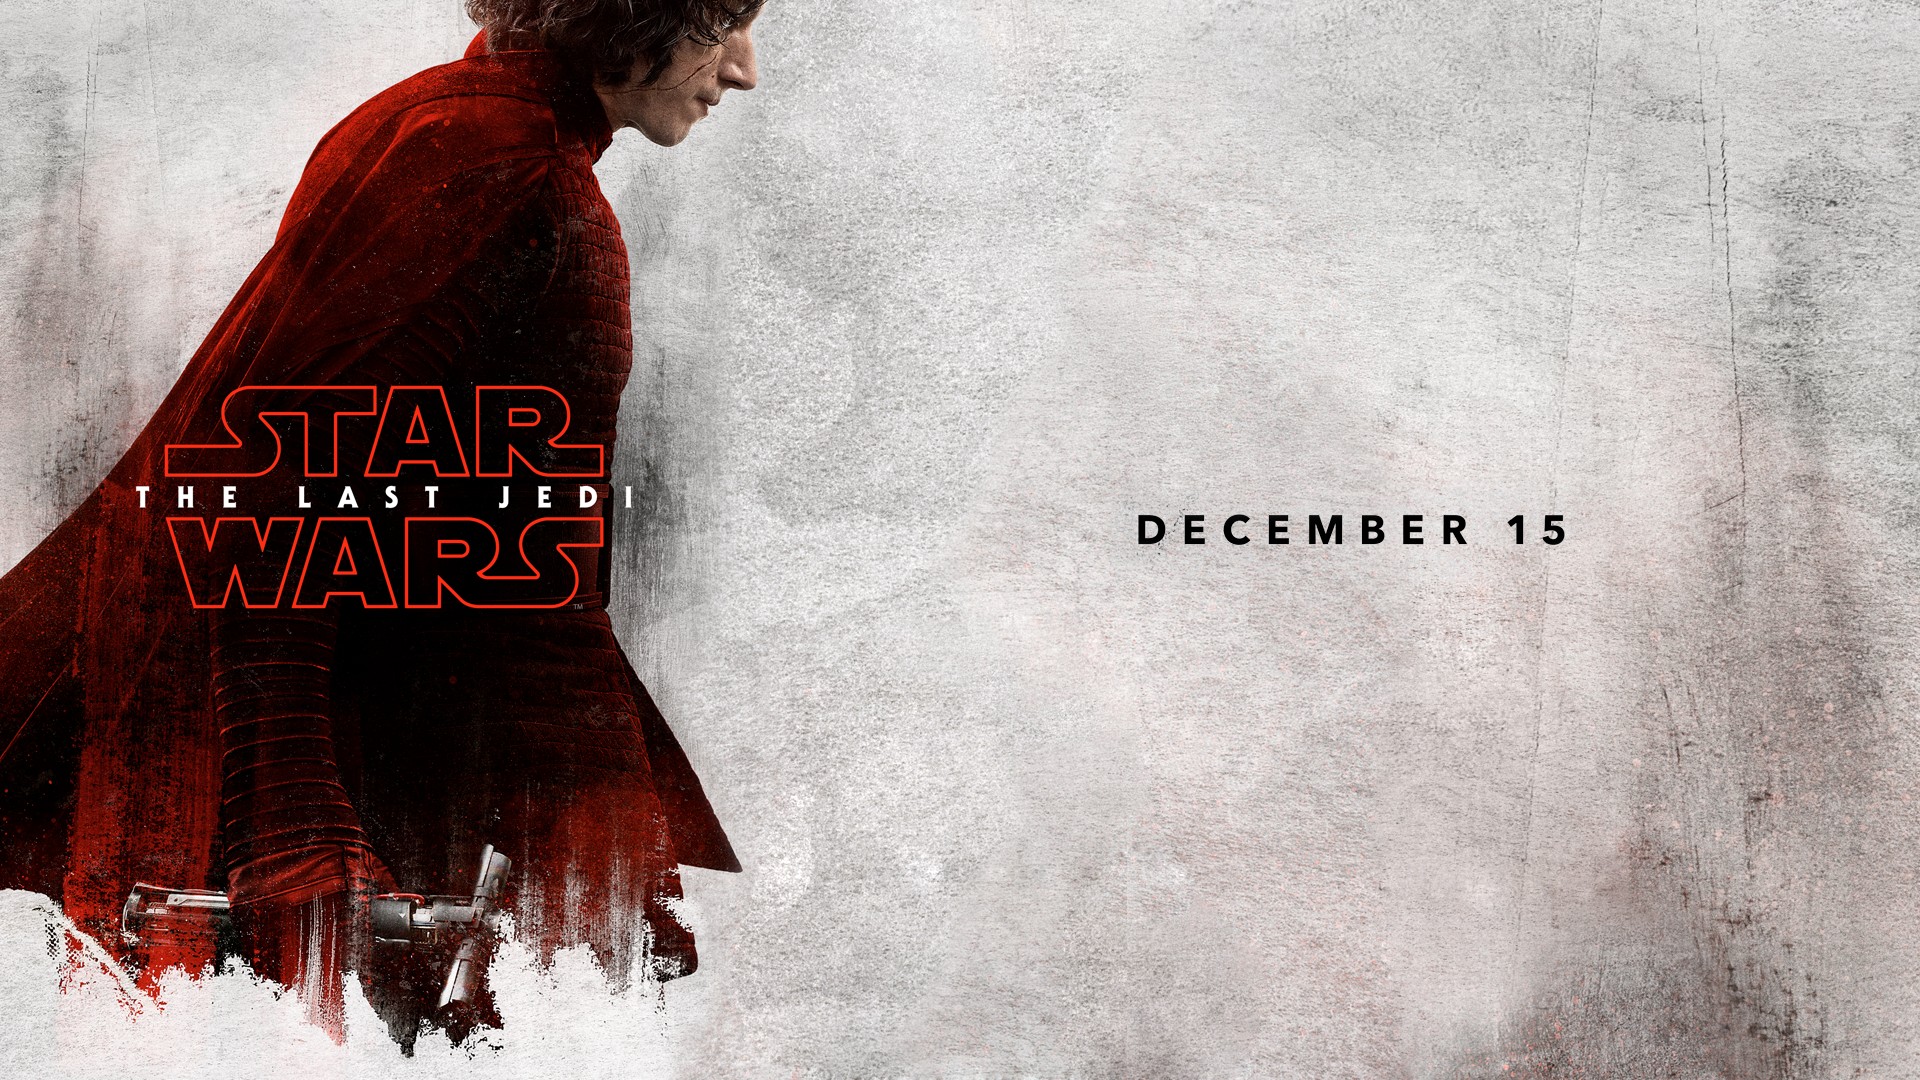 Star Wars The Last Jedi Movie Poster Wallpapers